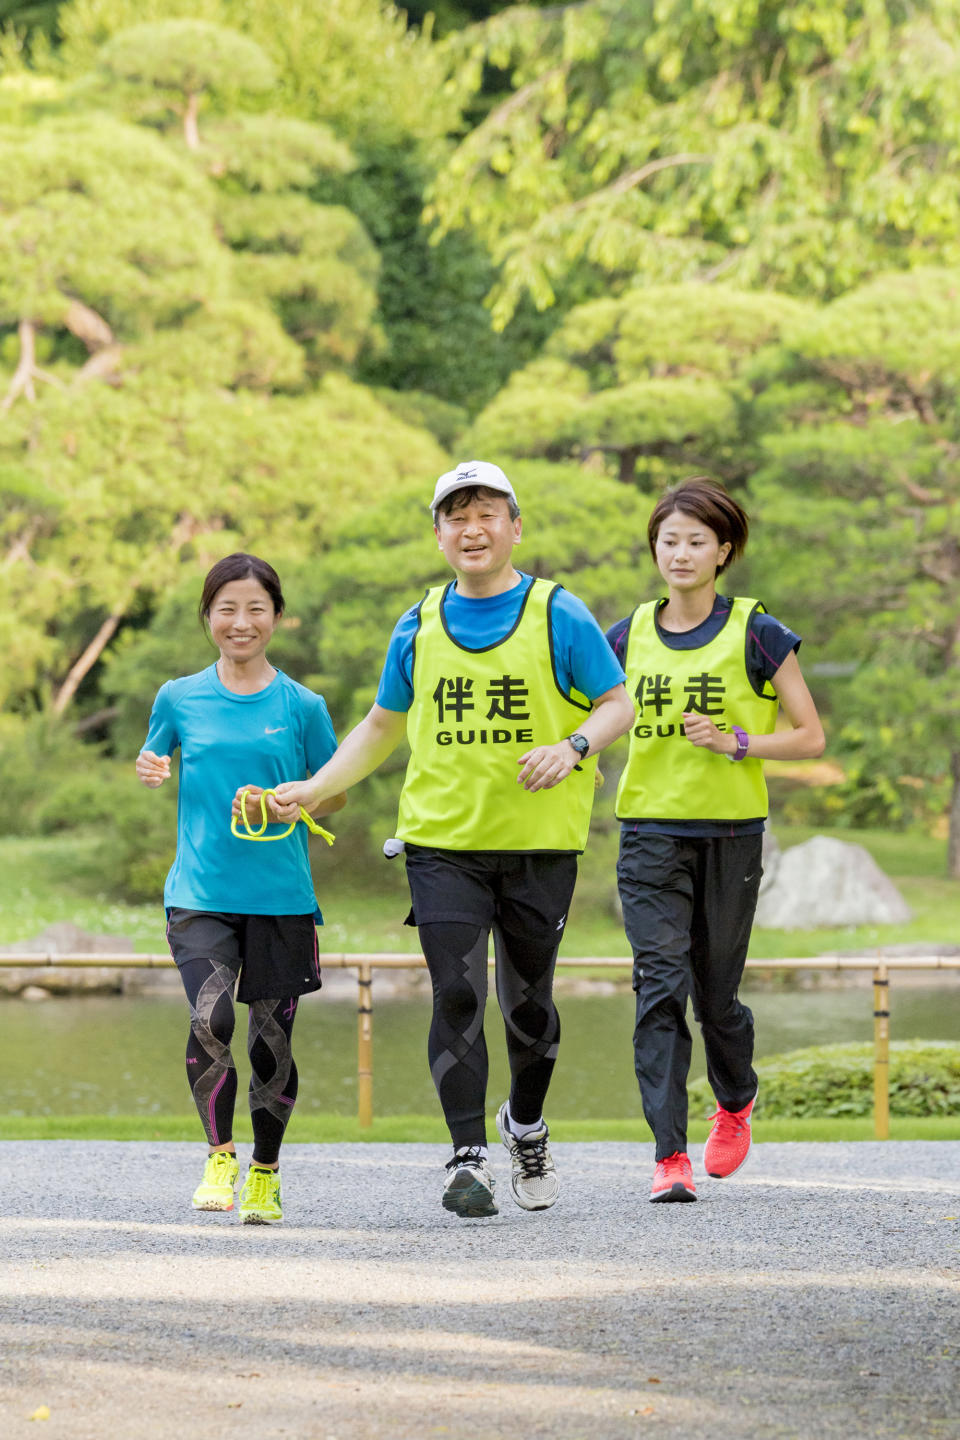 In this June 26, 2018, photo provided by the Imperial Household Agency of Japan, Japan's Crown Price Naruhito guides Rio Paralympics women's T12 marathon silver medalist Misato Michishita as they run together at Akasaka Imperial Garden in Tokyo. Naruhito celebrates his 59th birthday on Saturday, Feb. 23, 2019. (Imperial Household Agency of Japan via AP)